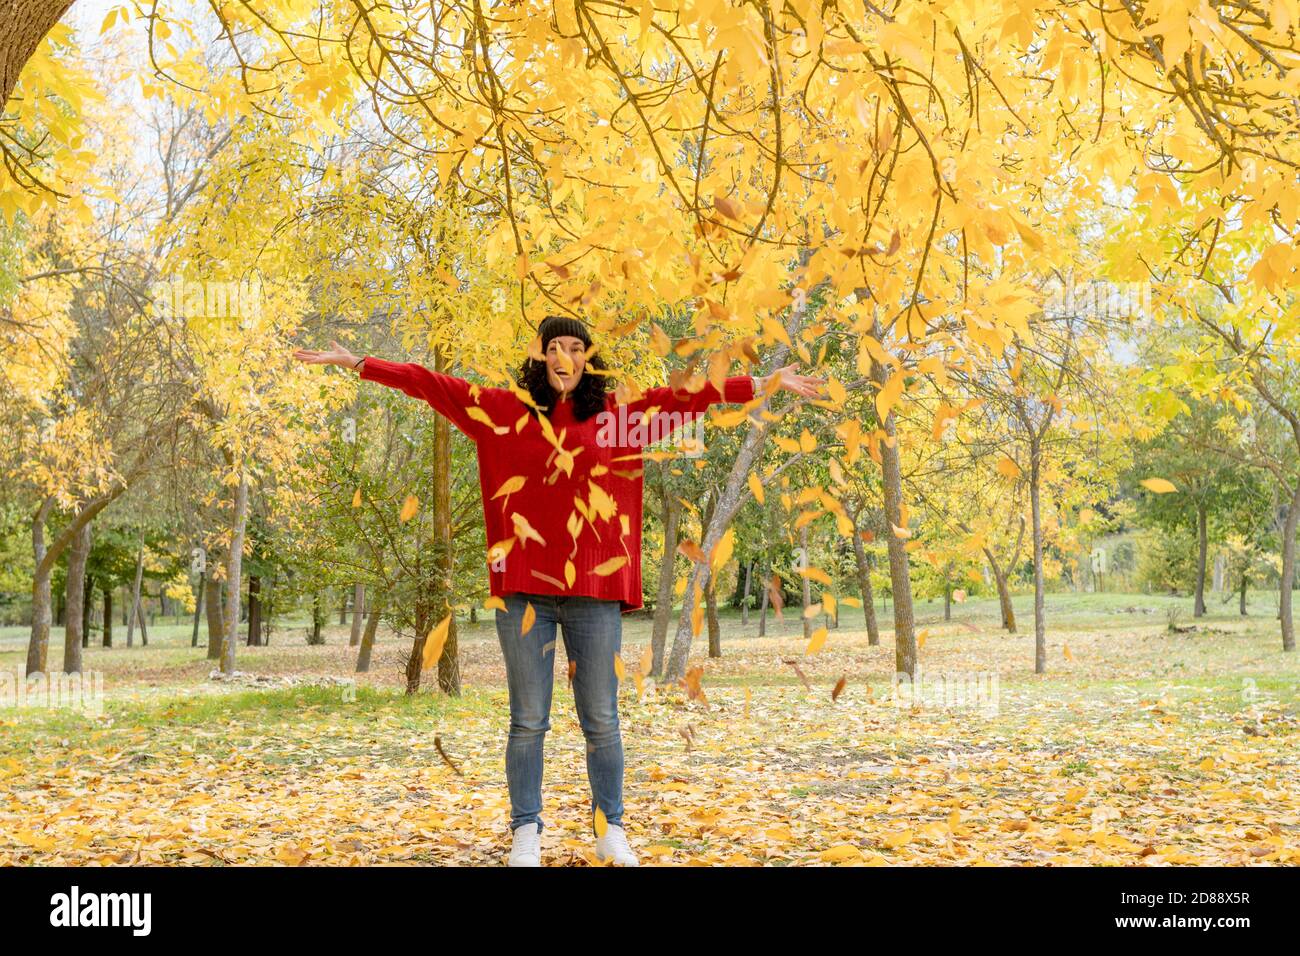 young woman with curly black hair in red sweater and woolen hat has fun throwing dry leaves that have fallen from the trees in a park in autumn Stock Photo